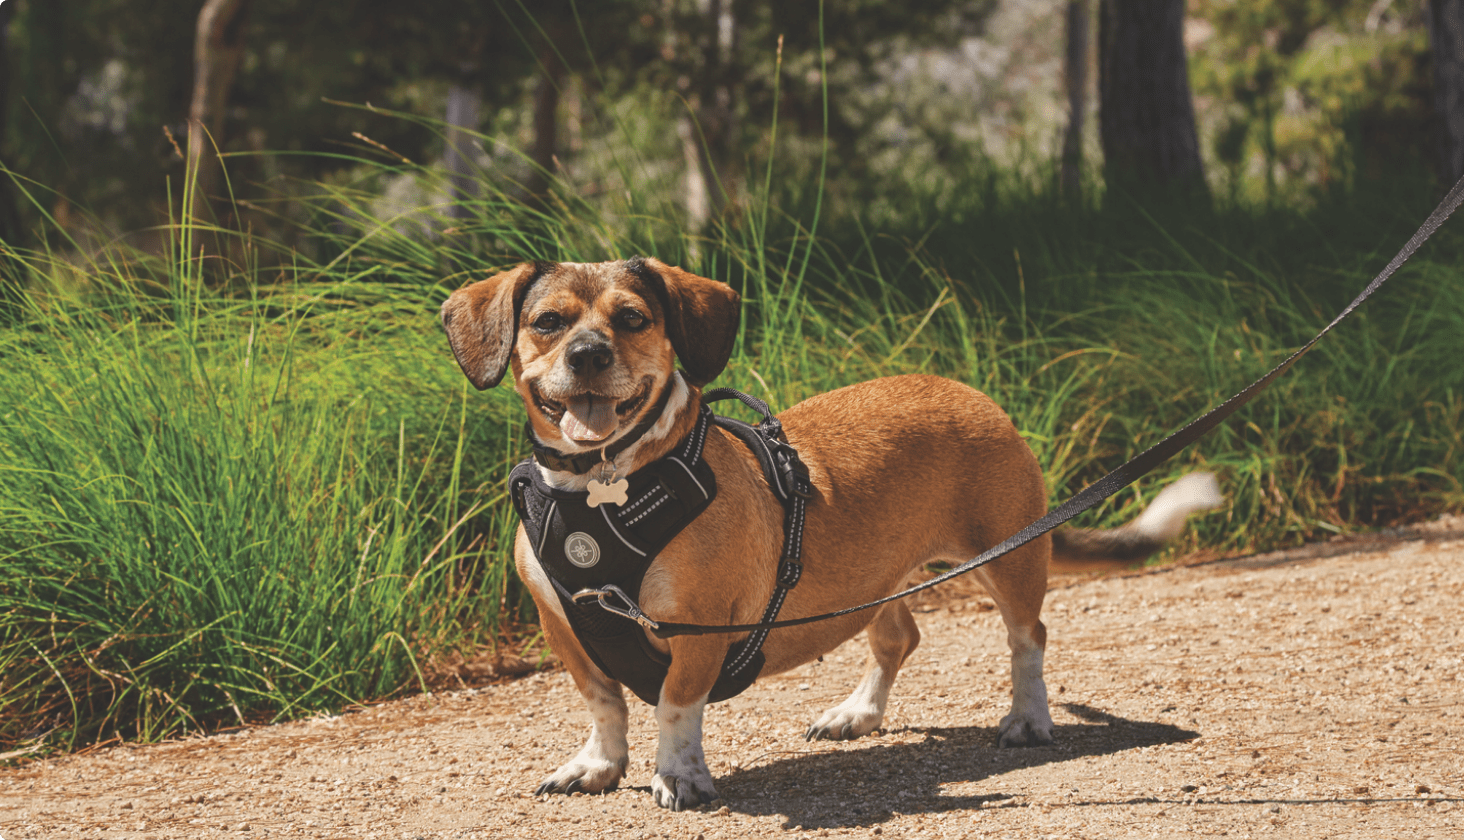 A dog standing in a trail, wearing a harness collar and leash.